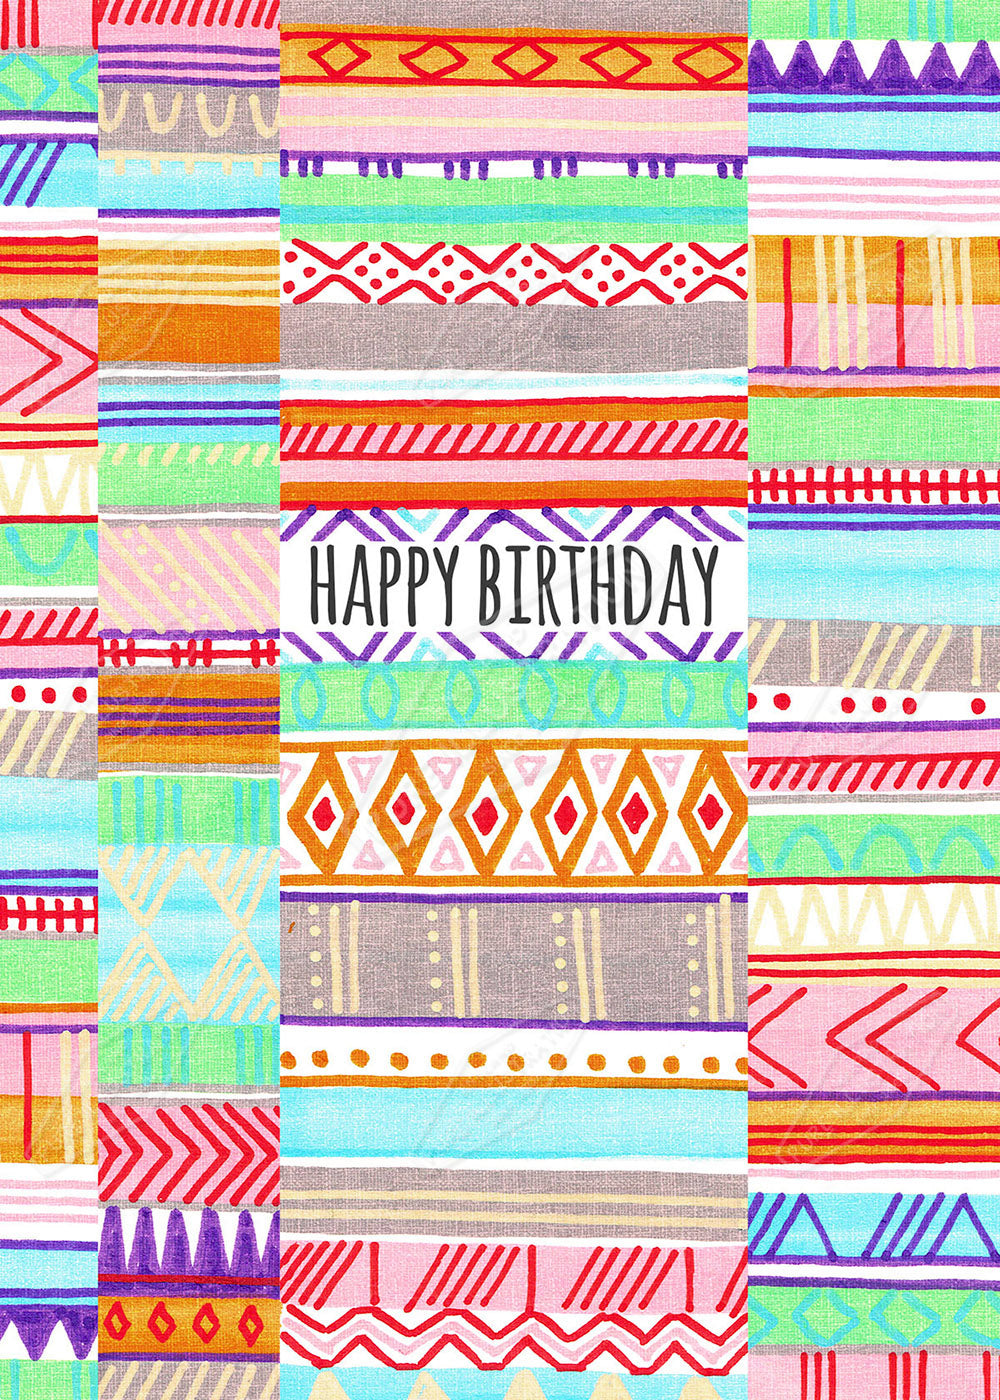 Bright Ethnic Pattern Birthday Design by Pure Art Licensing Agency & Surface Design Studio